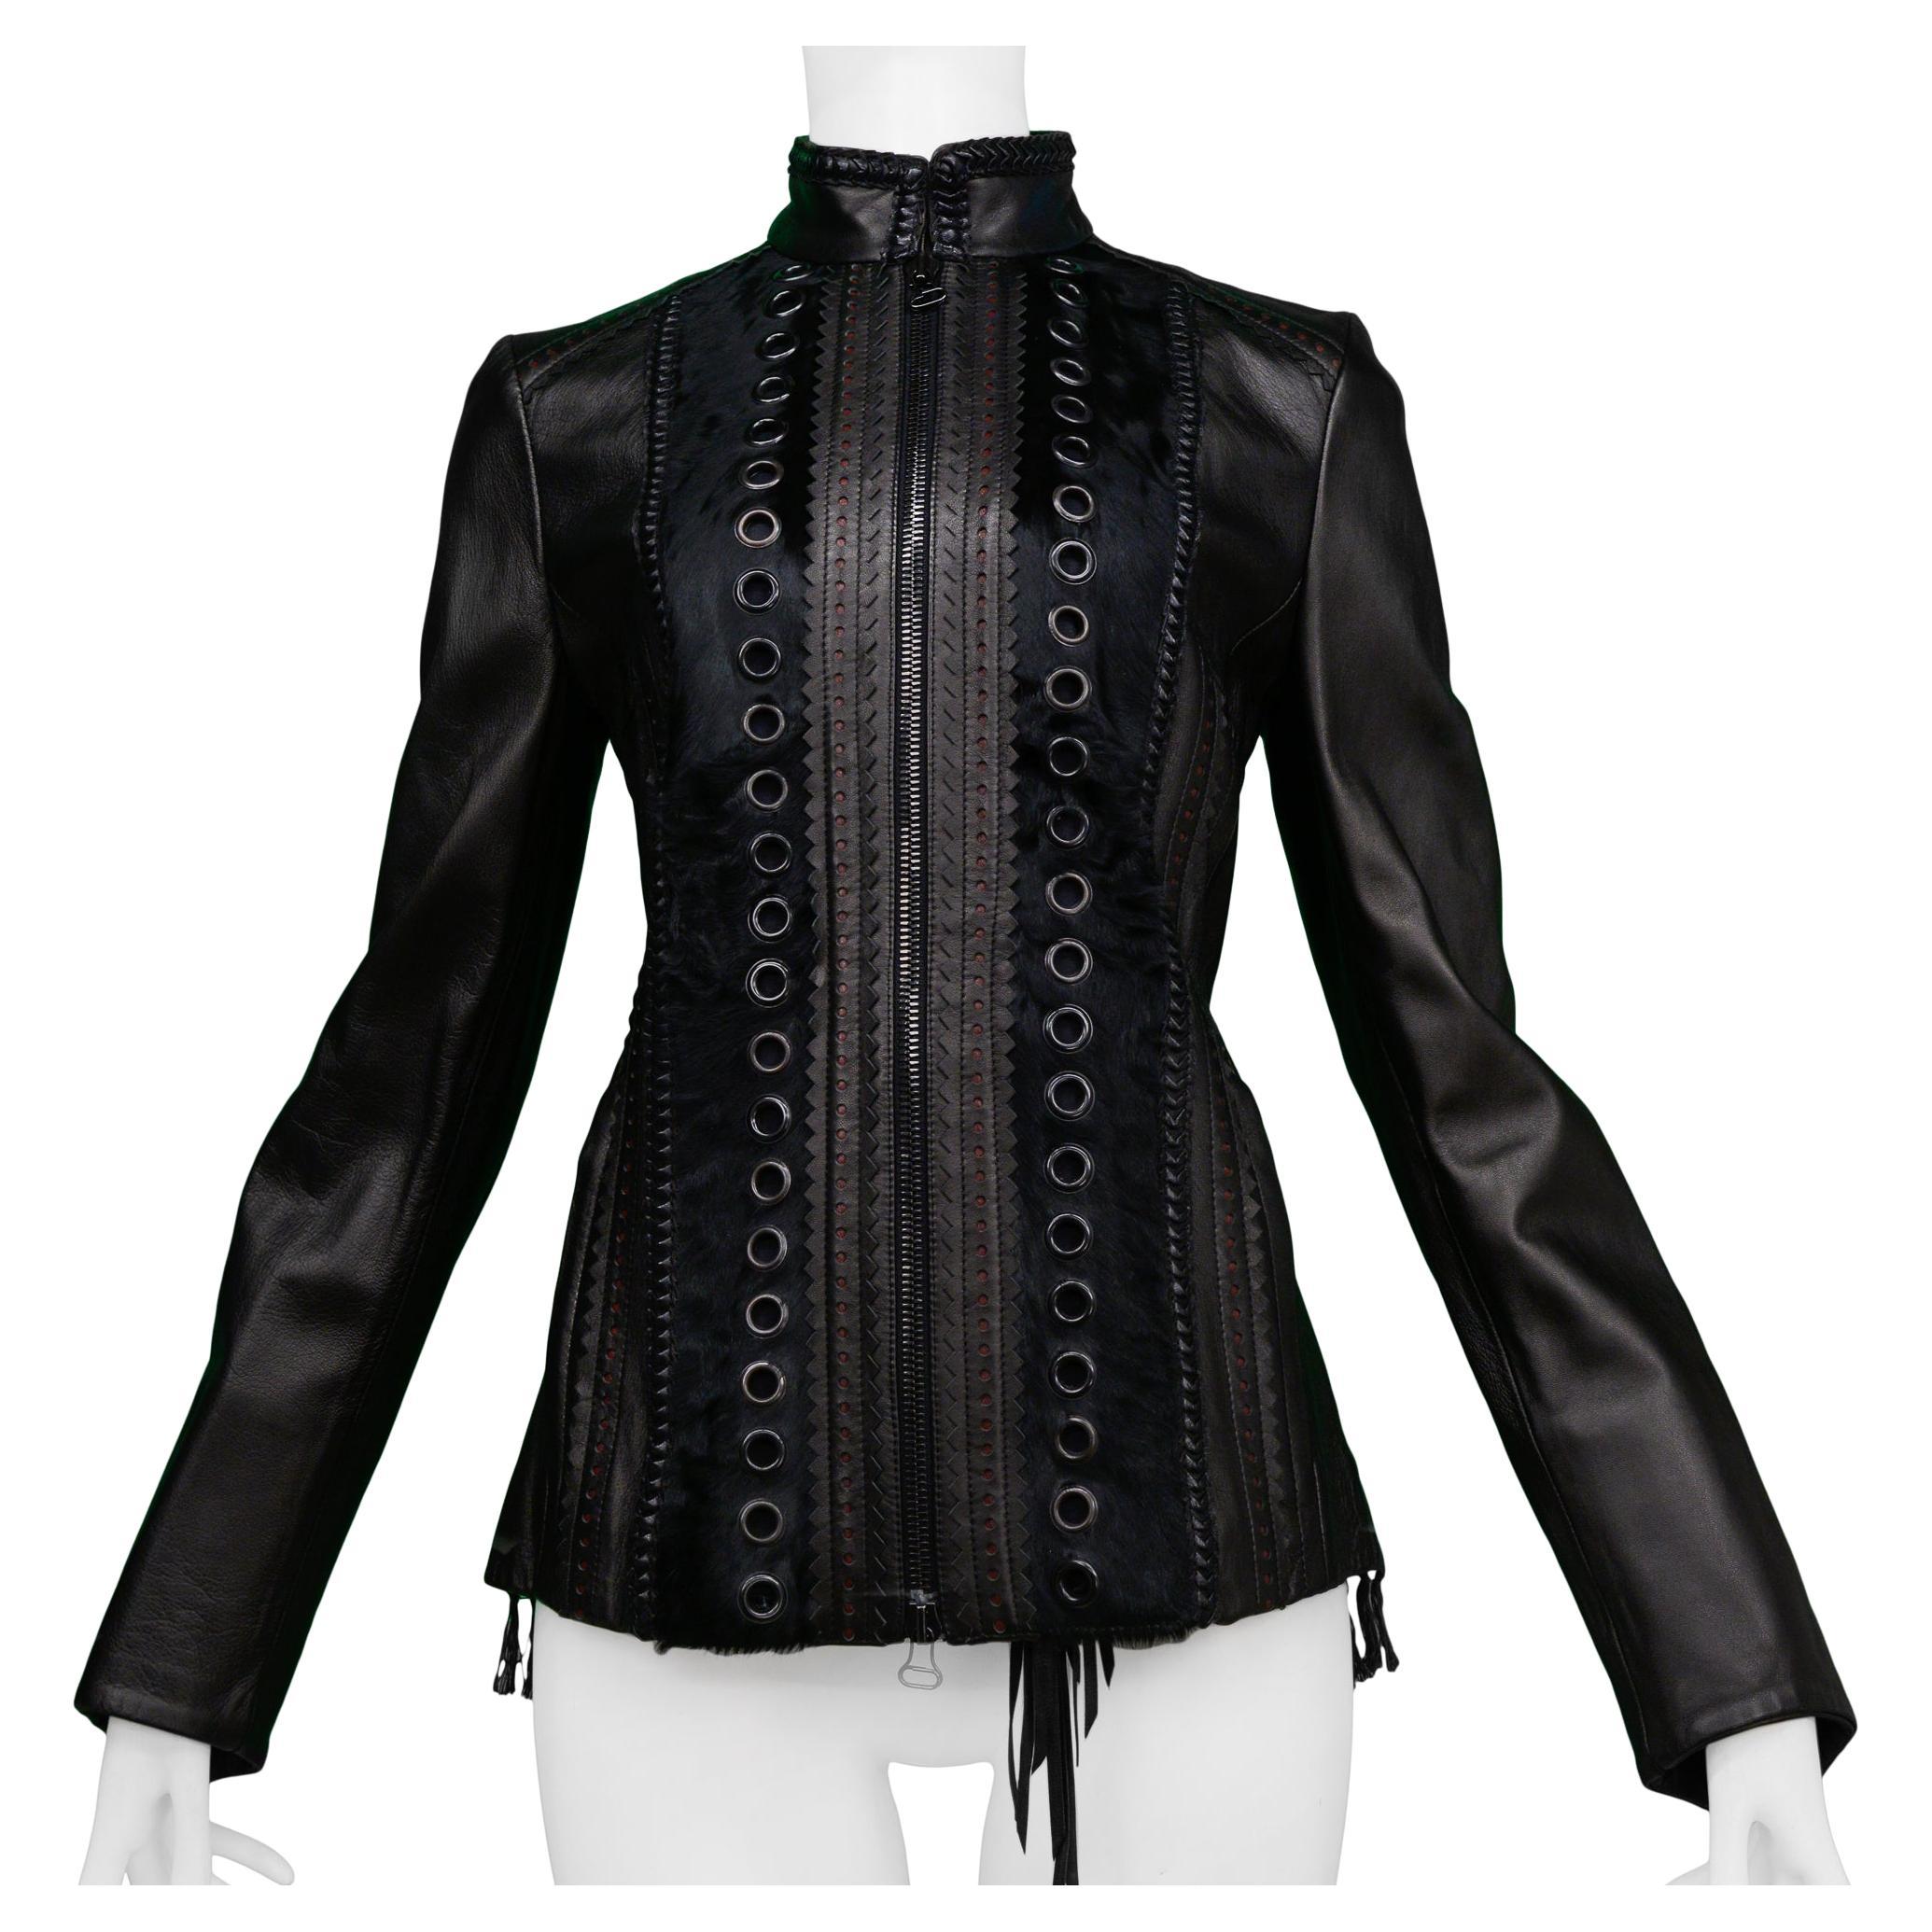 Stunning Gianfranco Ferre Black Motorcycle Leather Jacket With Fur Trim For Sale